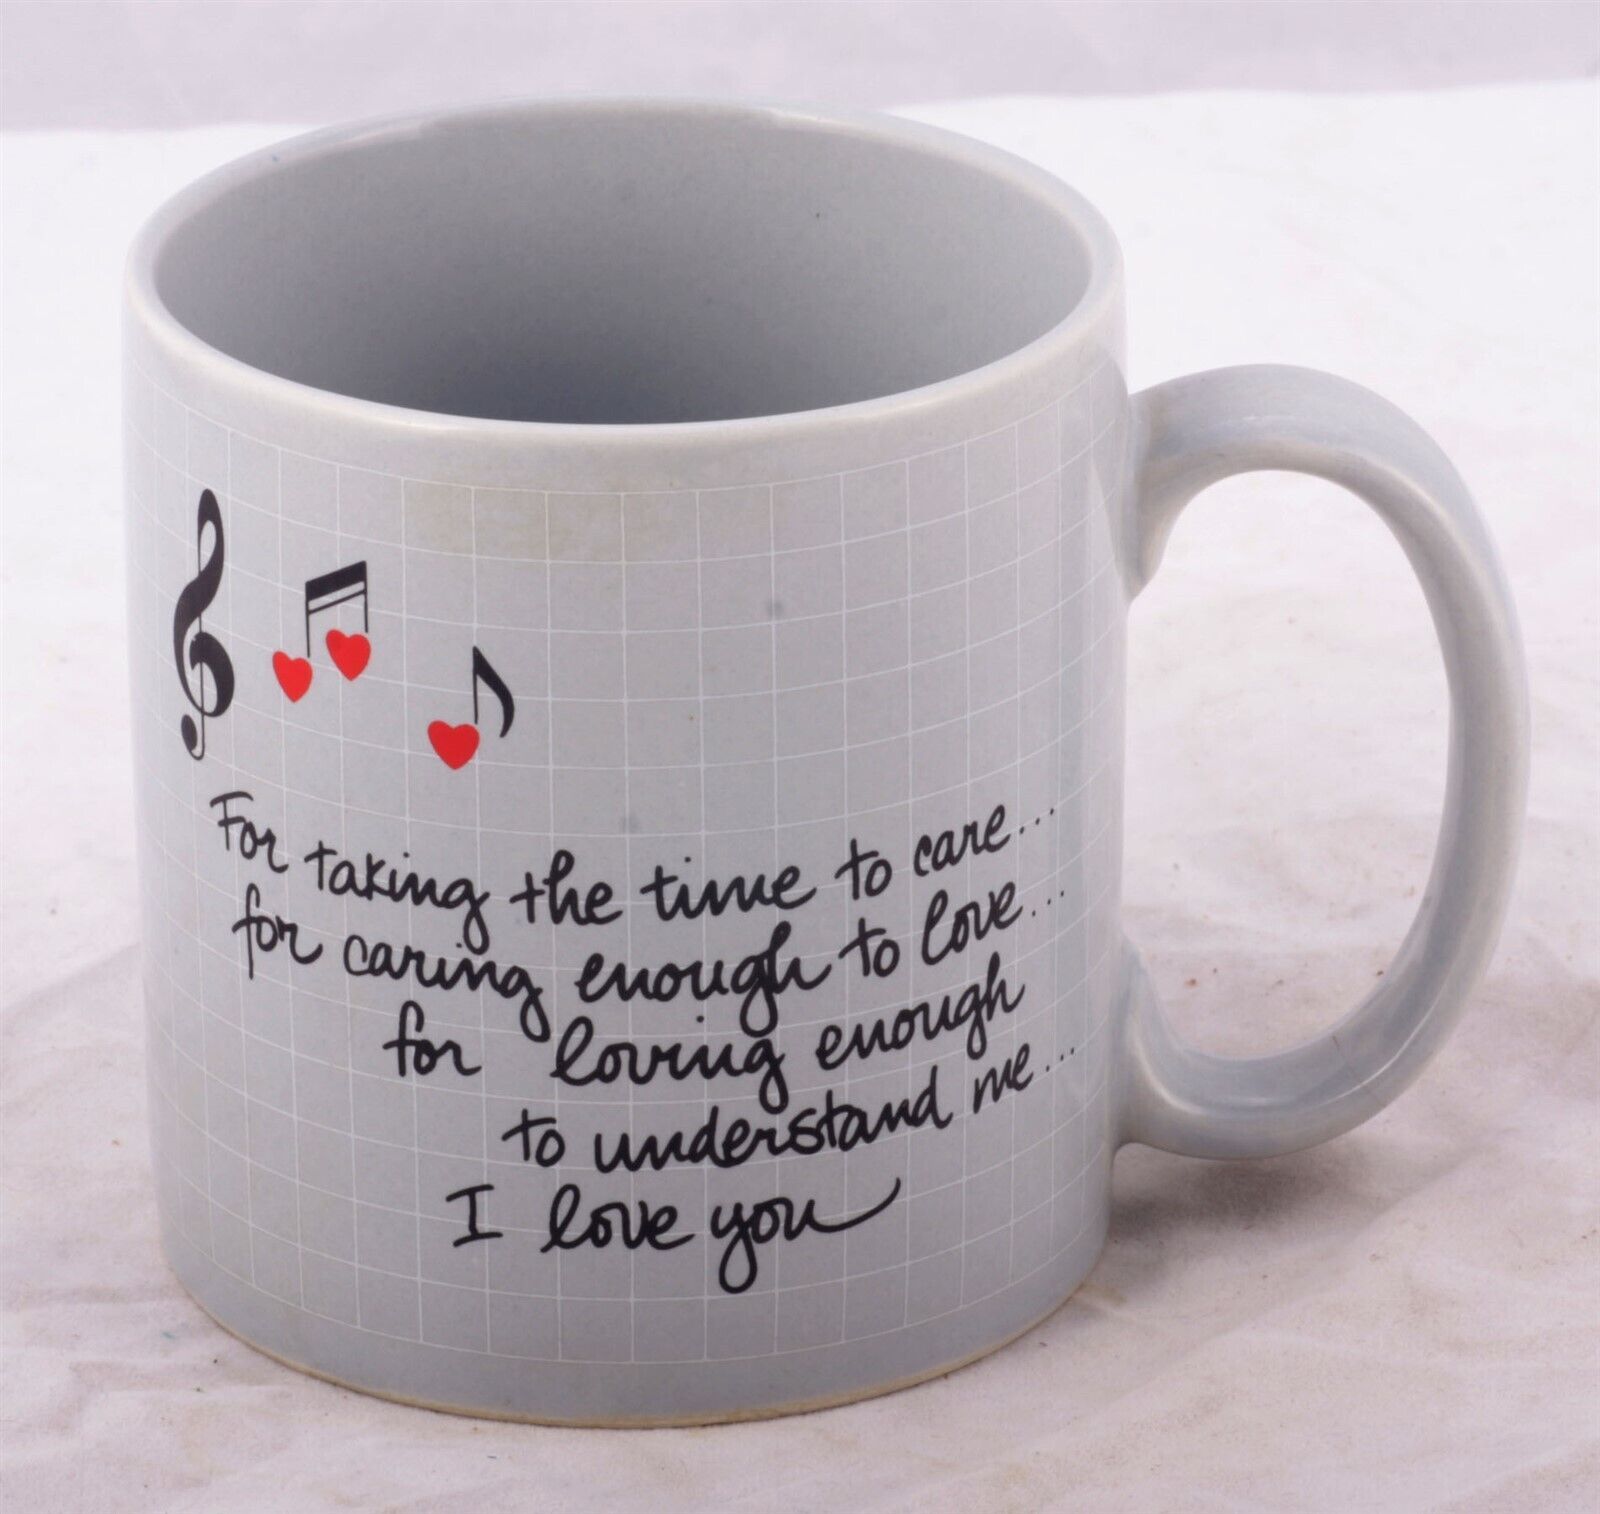 Primary image for Coffee Mug "For taking time to... caring enough... loving enough... I love you"